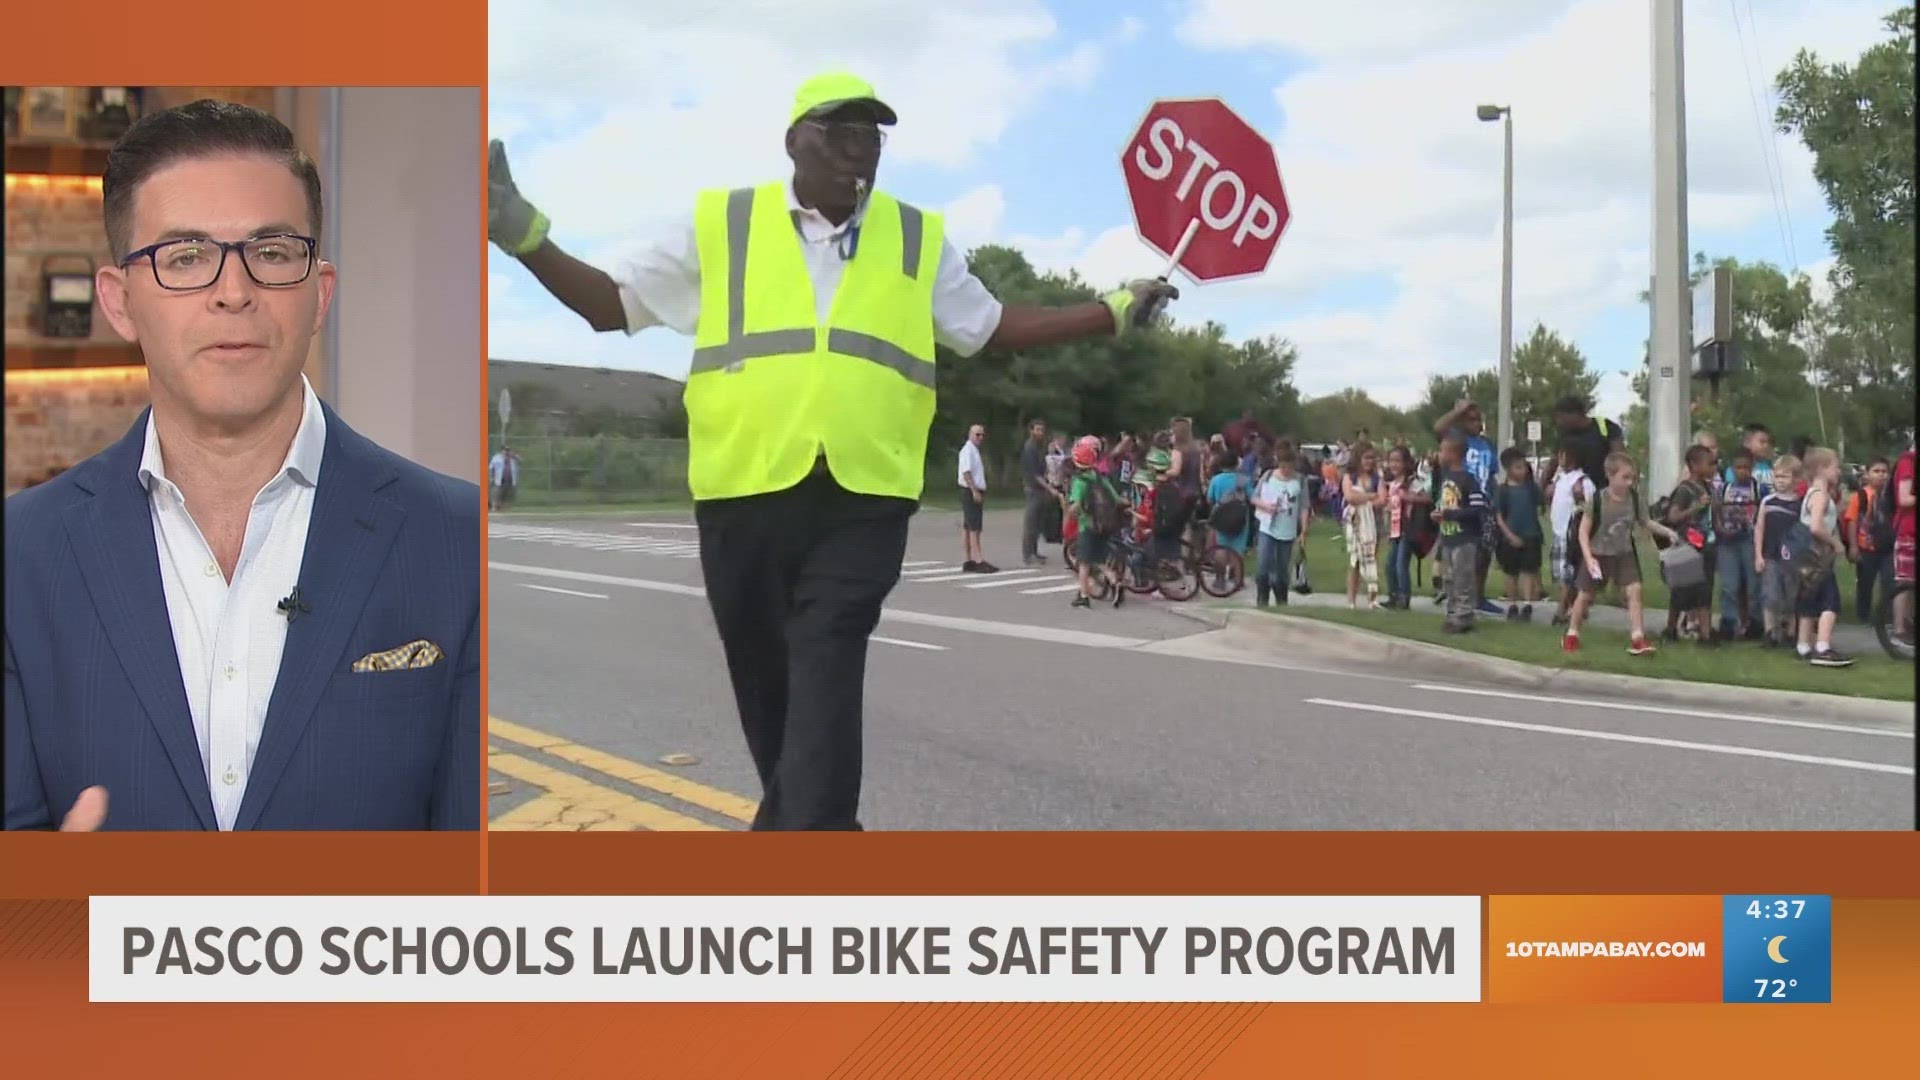 Pasco County Schools is launching their new safety initiative to remind students to wear helmets while biking.